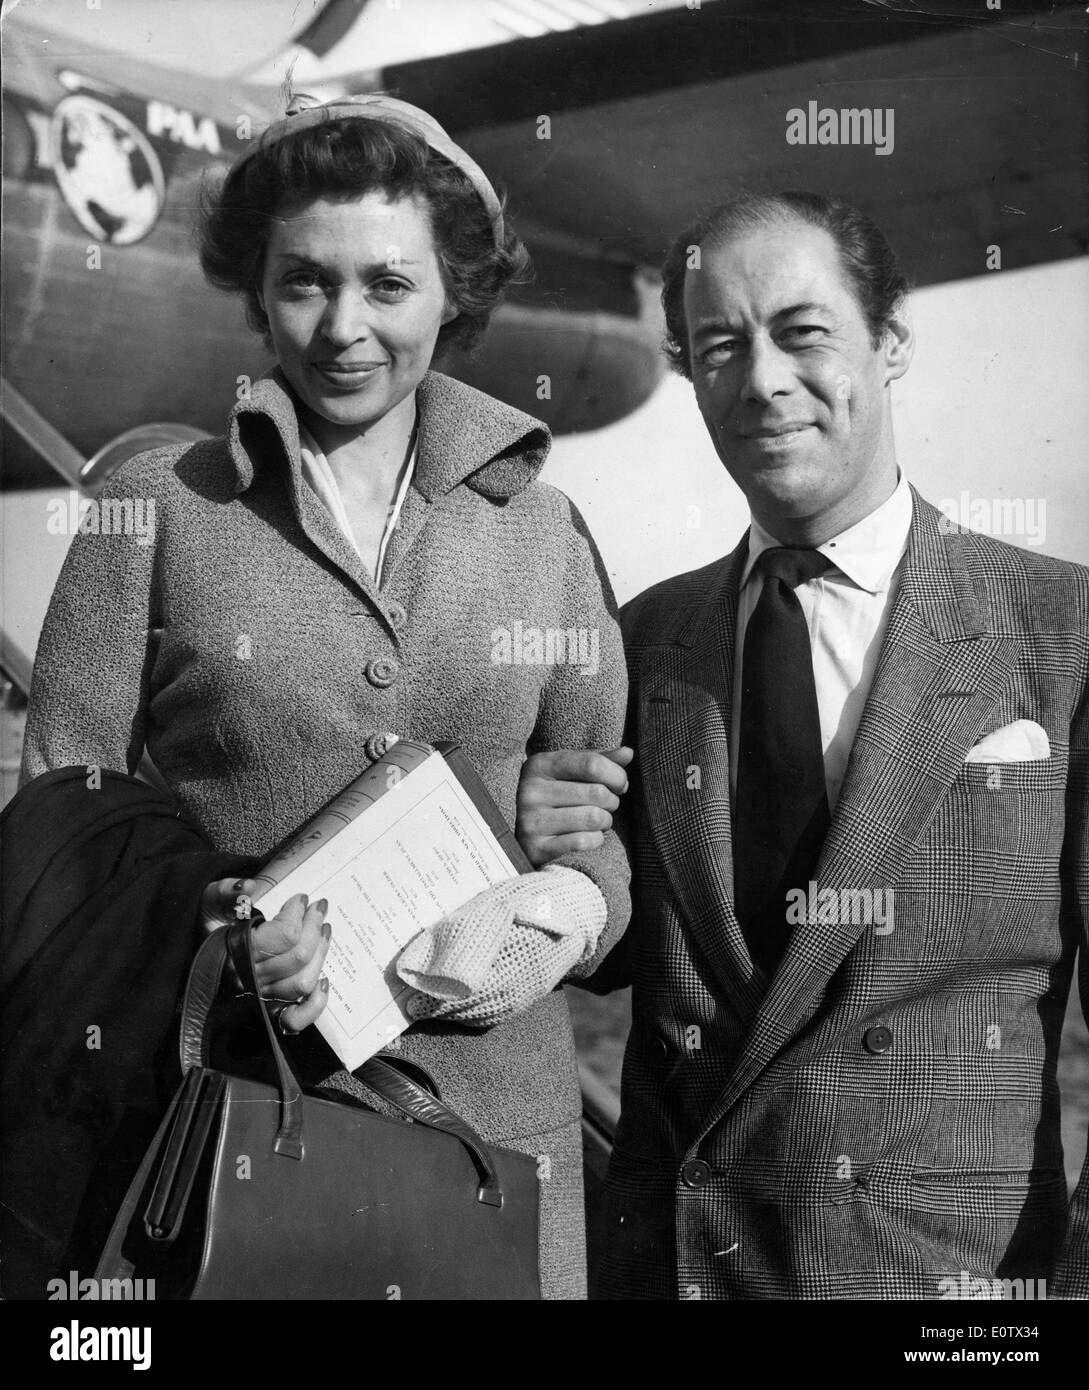 Actors Rex Harrison and Lilli Palmer at the airport Stock Photo